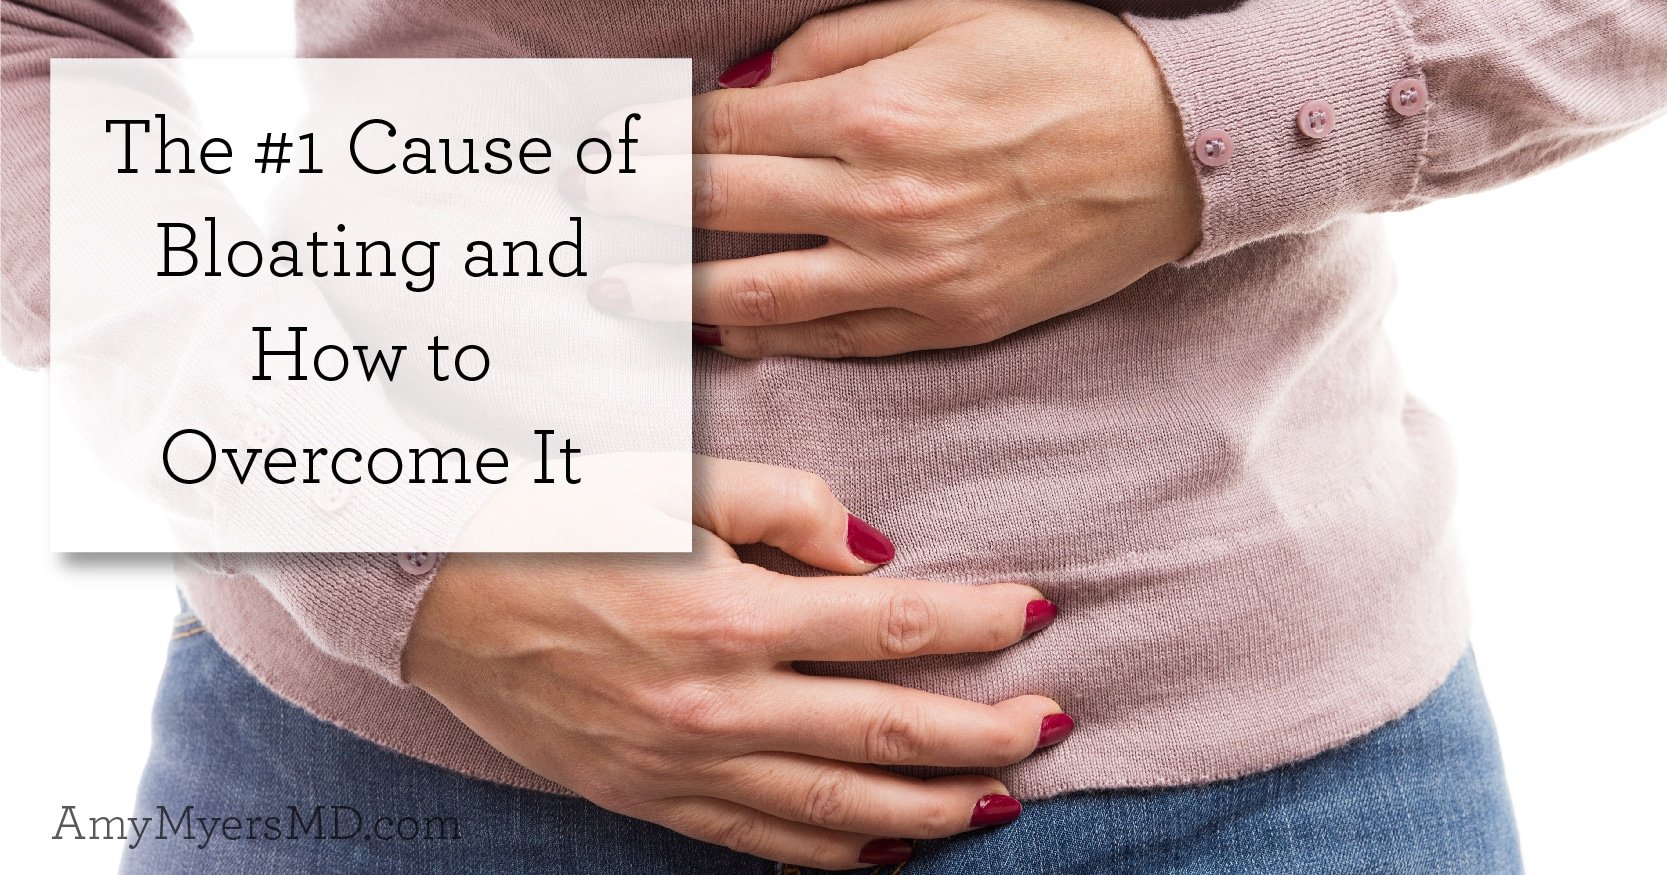 The #1 Cause of Bloating and How to Overcome It